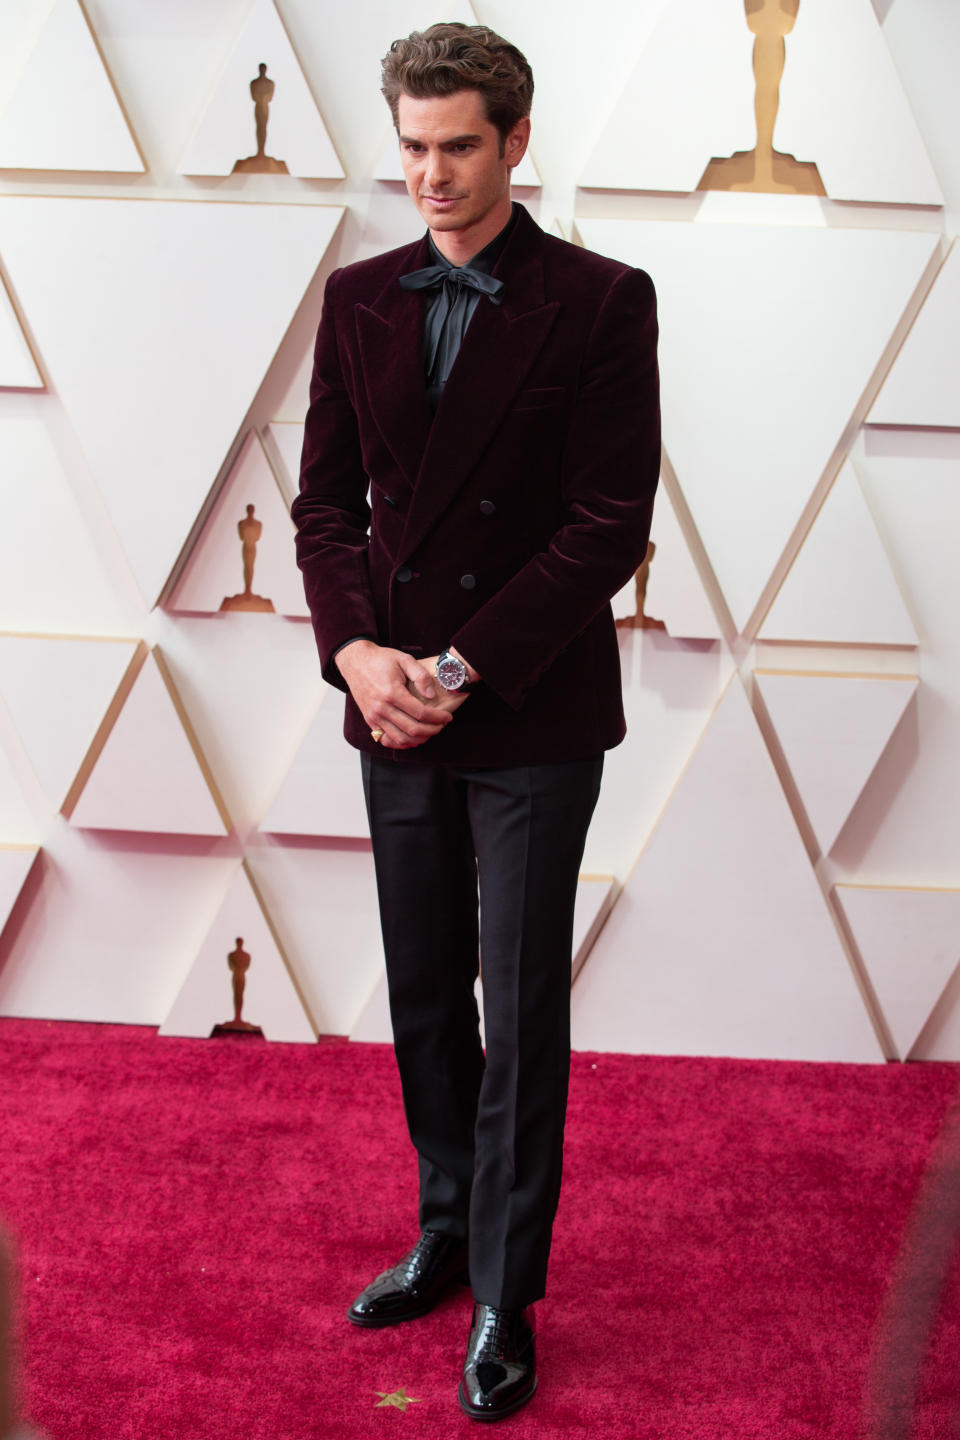 Andrew Garfield at the 94th Academy Awards held at Dolby Theatre at the Hollywood & Highland Center on March 27th, 2022 in Los Angeles, California.